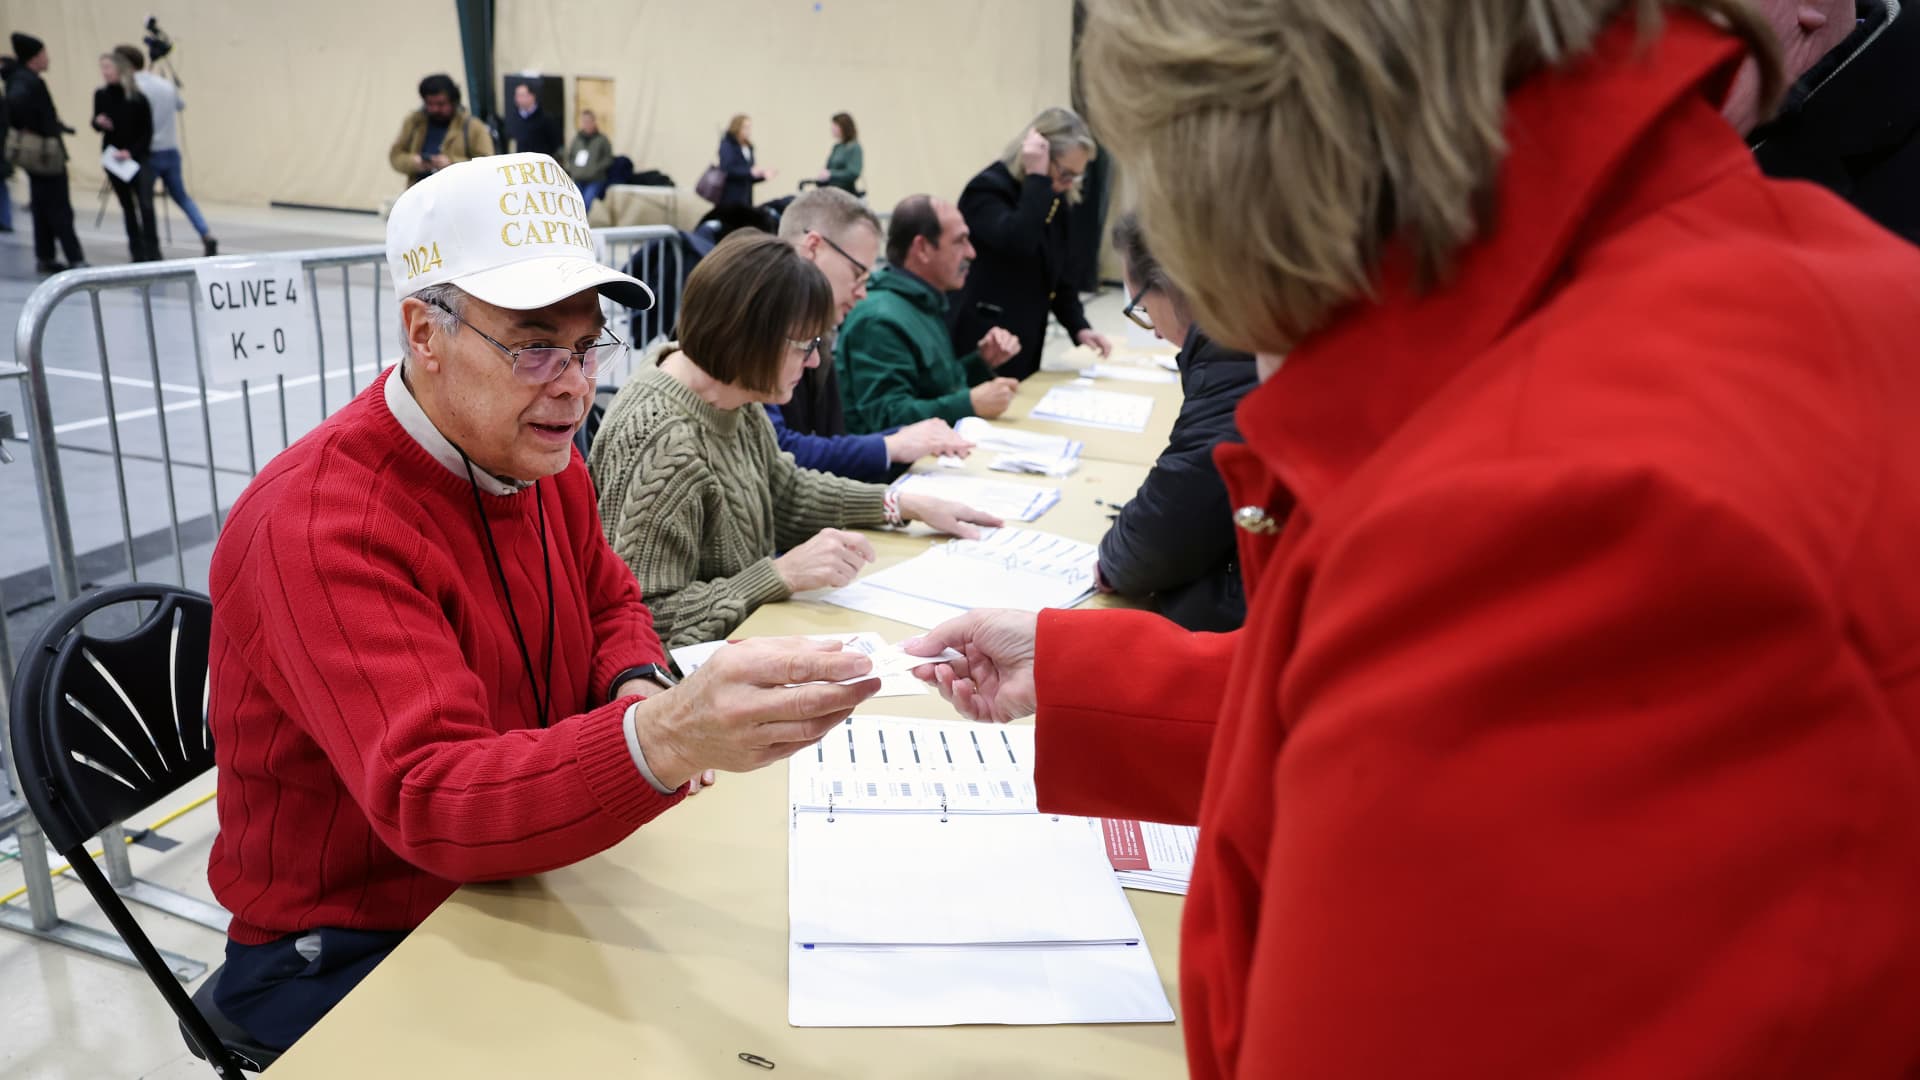 A caucus worker checks in voters at a caucus site at the Horizon Events Center on January 15, 2024 in Clive, Iowa.